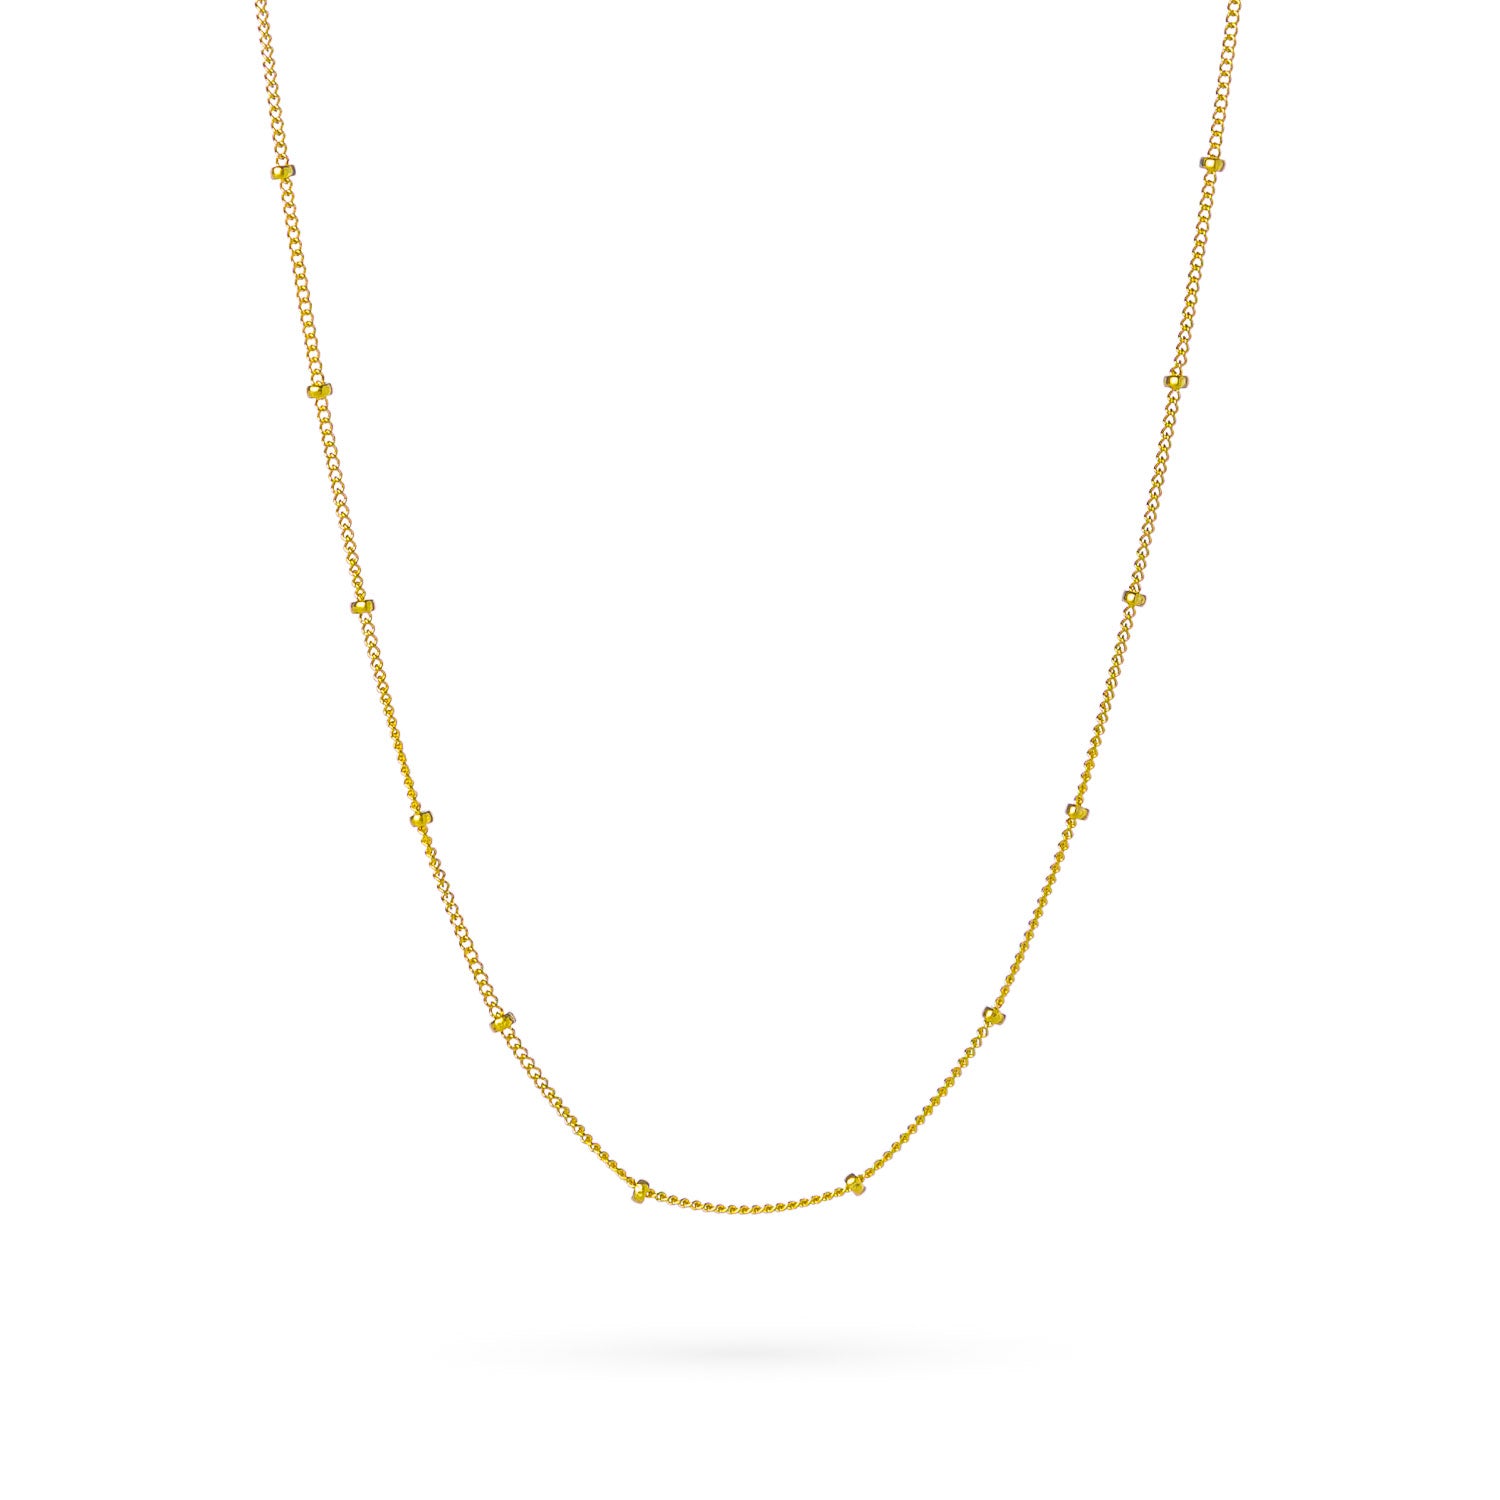 Dotted Necklace: Gold